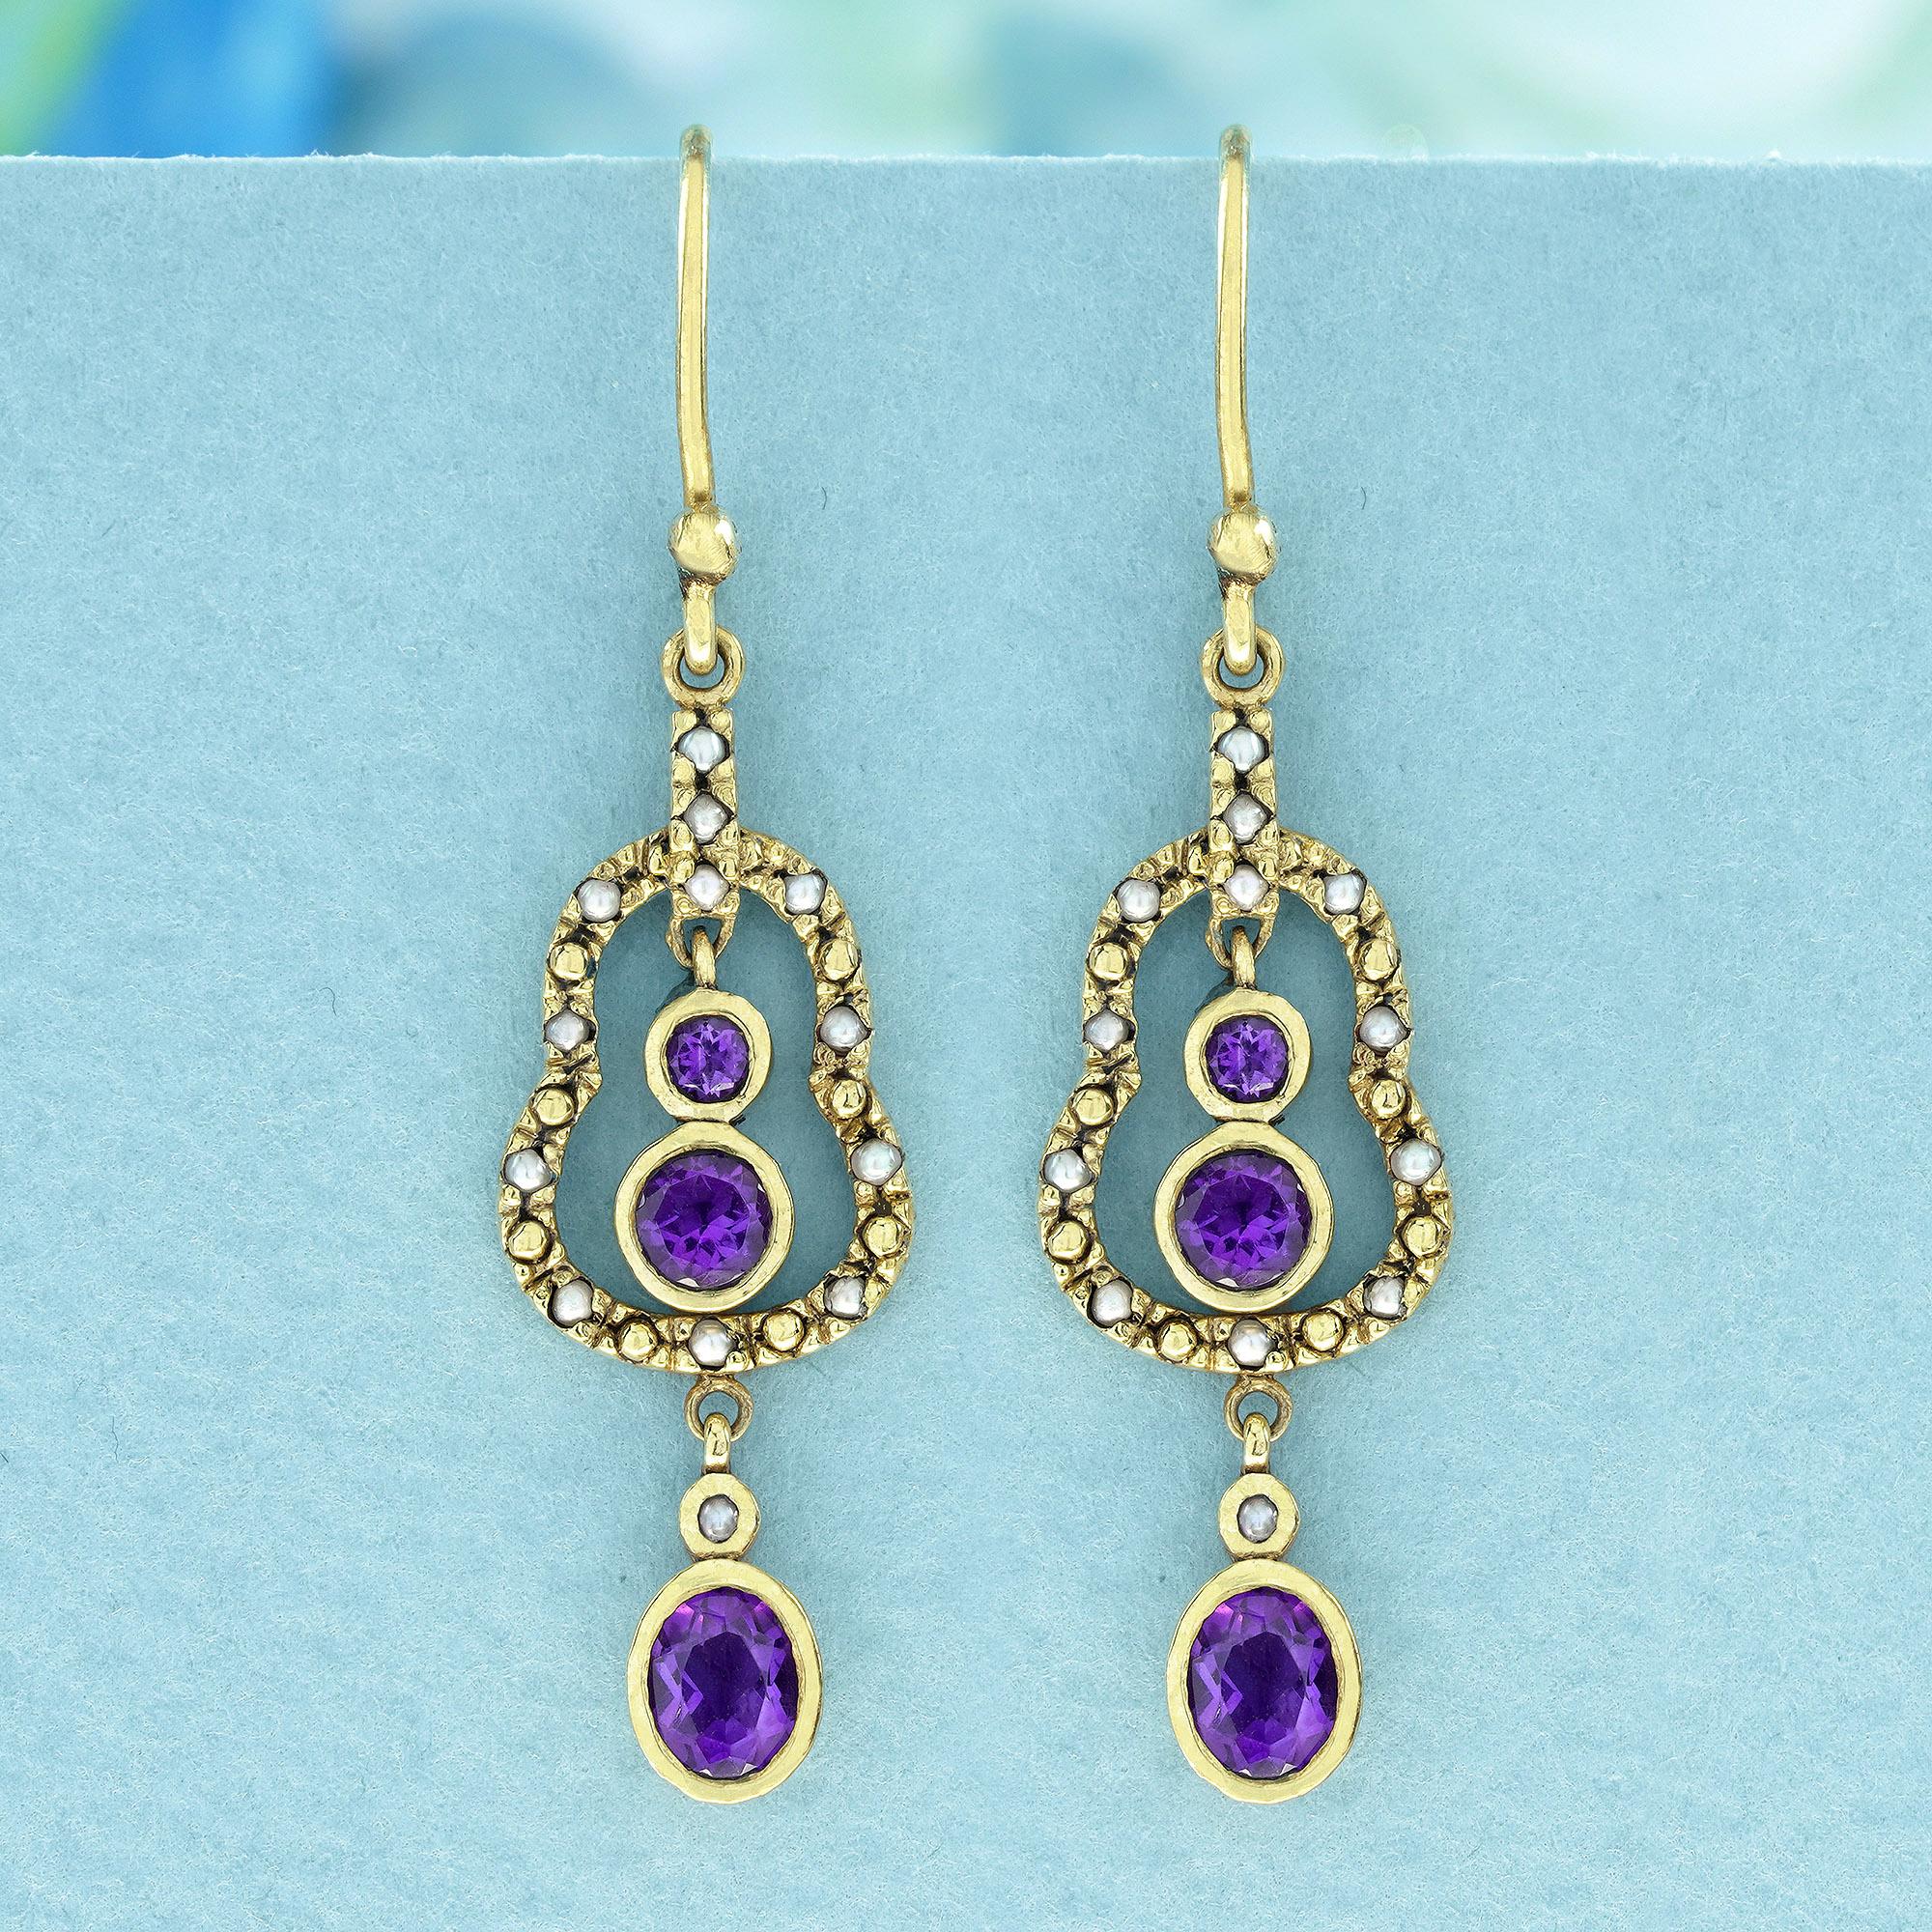 These exquisite earrings boast a vintage allure, crafted with natural amethysts and pearls, set elegantly in yellow gold. Each earring showcases two round, purple amethysts, embraced within round frames nestled inside a bigger pear-shaped frames,